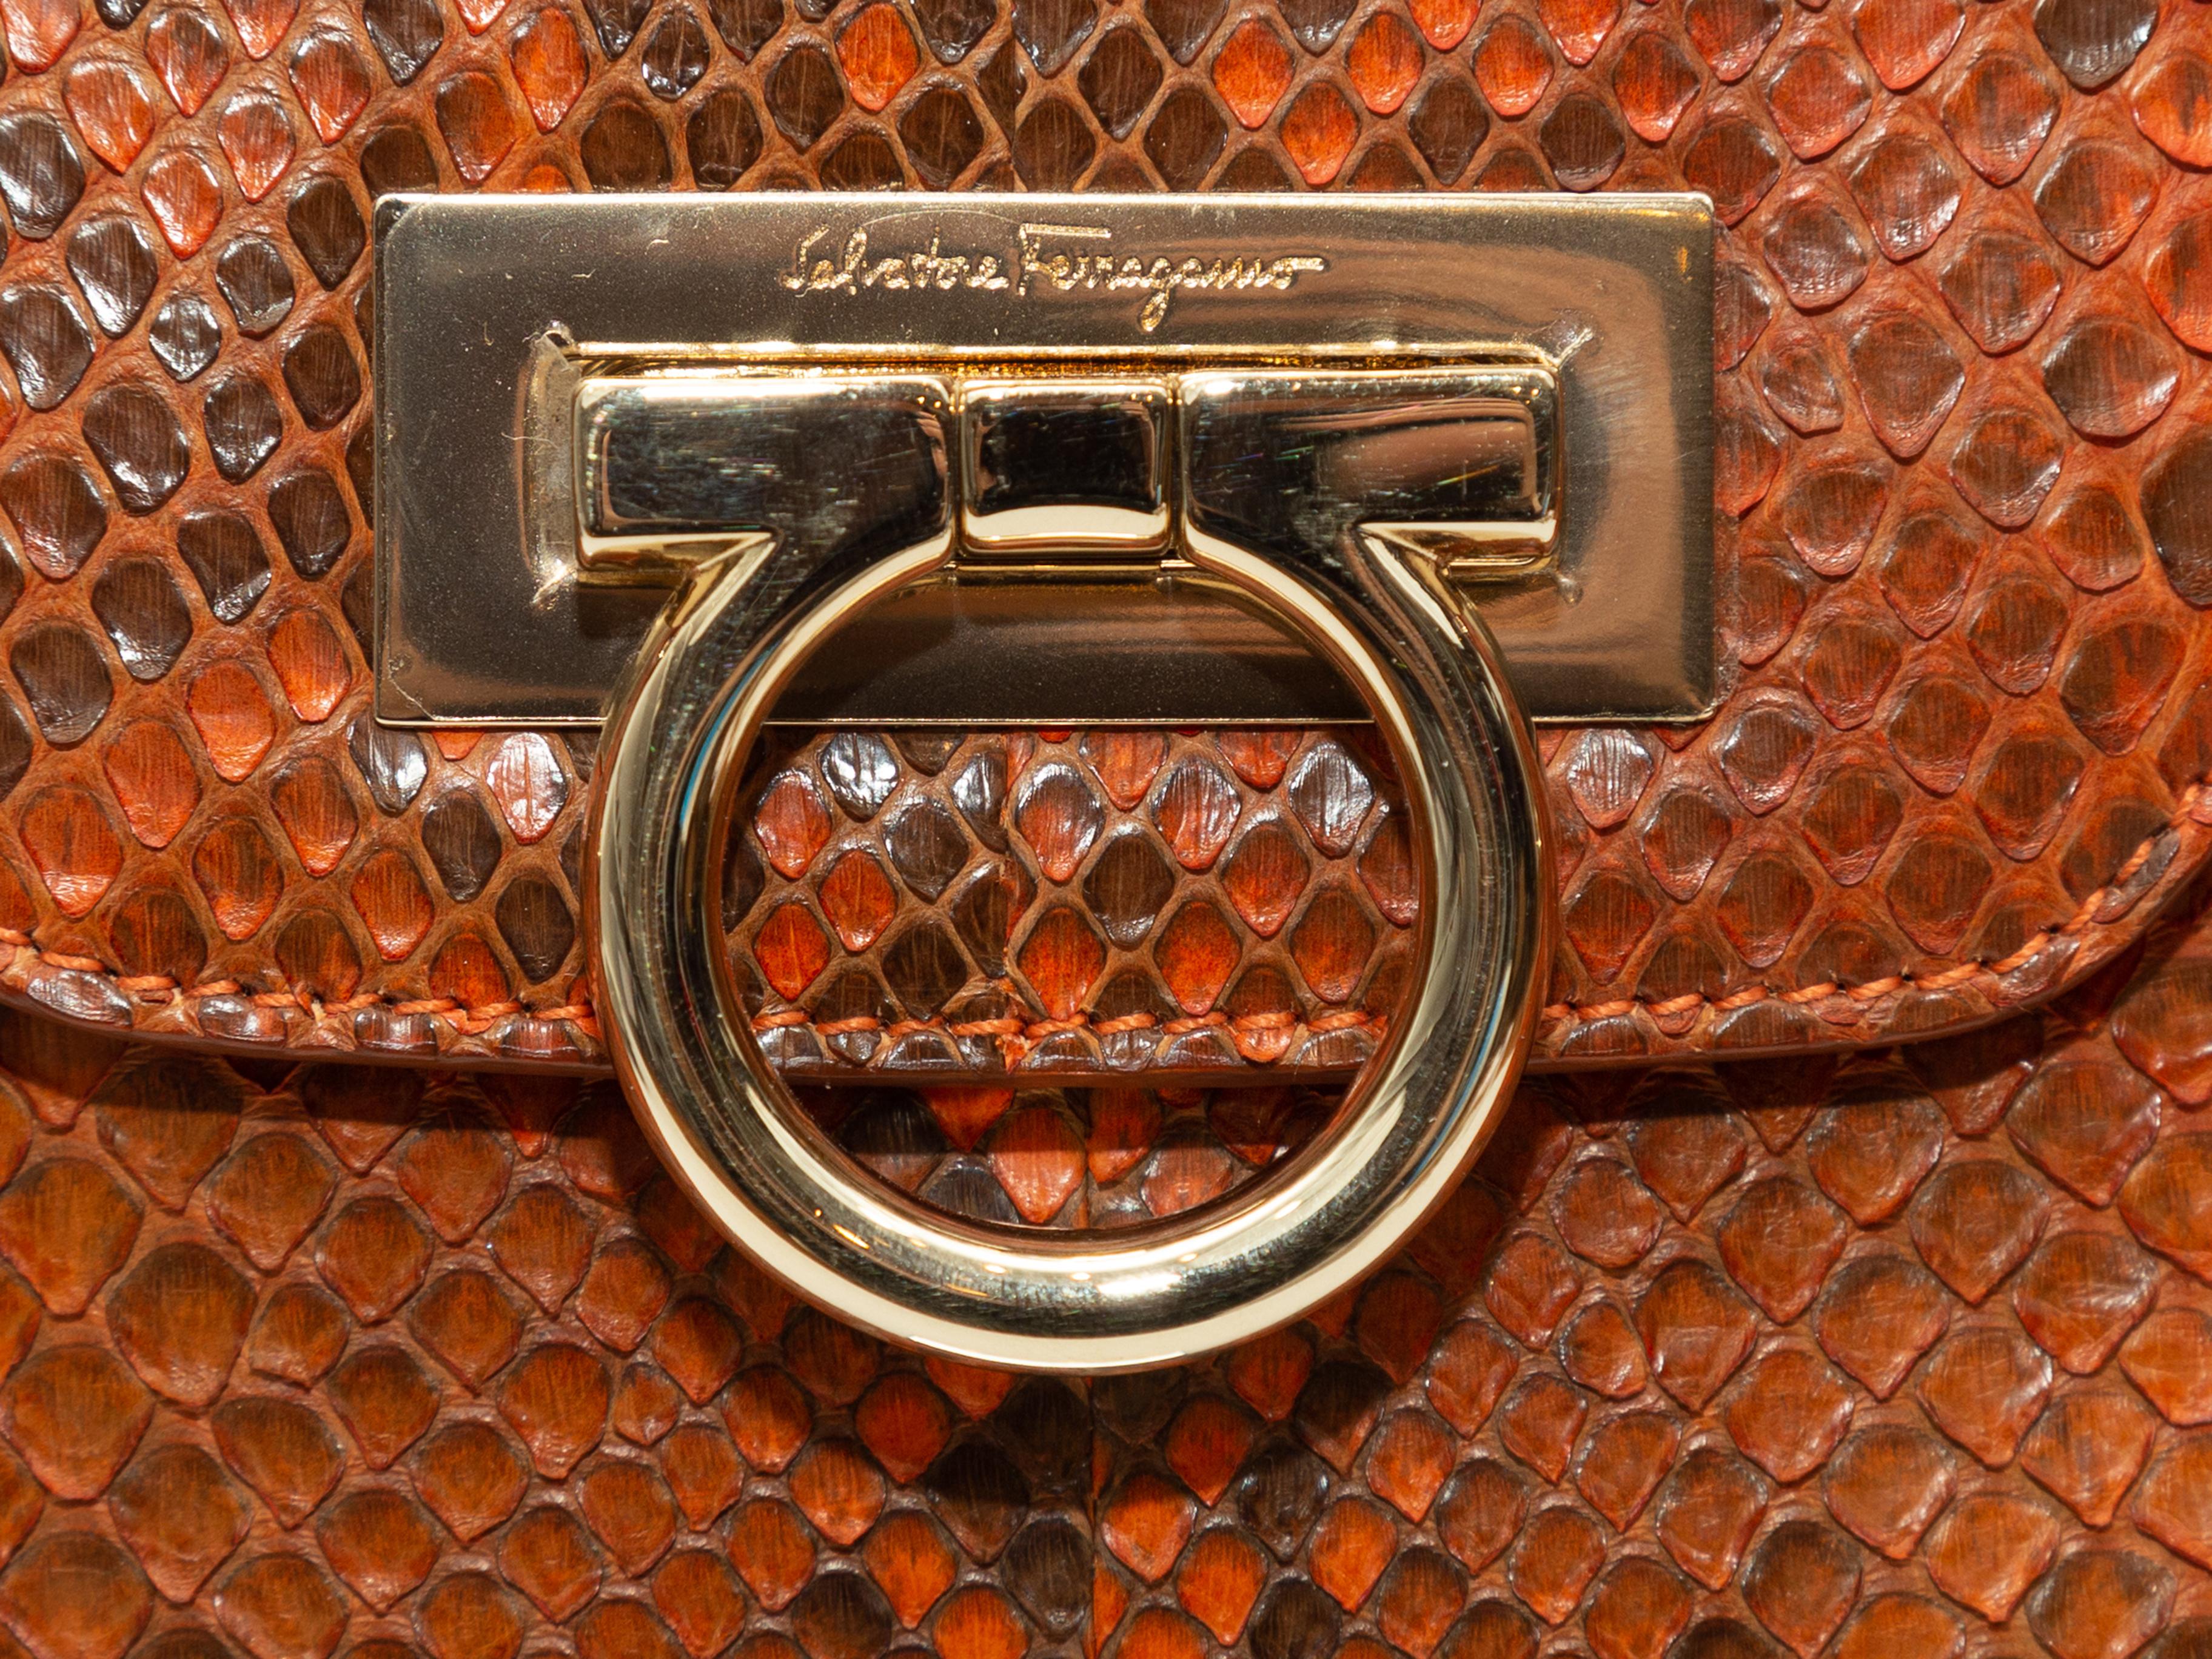 Product Details: Orange python handbag by Salvatore Ferragamo. Gold-tone hardware. Dual rolled top handles. Buckle accents at exterior sides. Gancini closure at front flap. 12.5